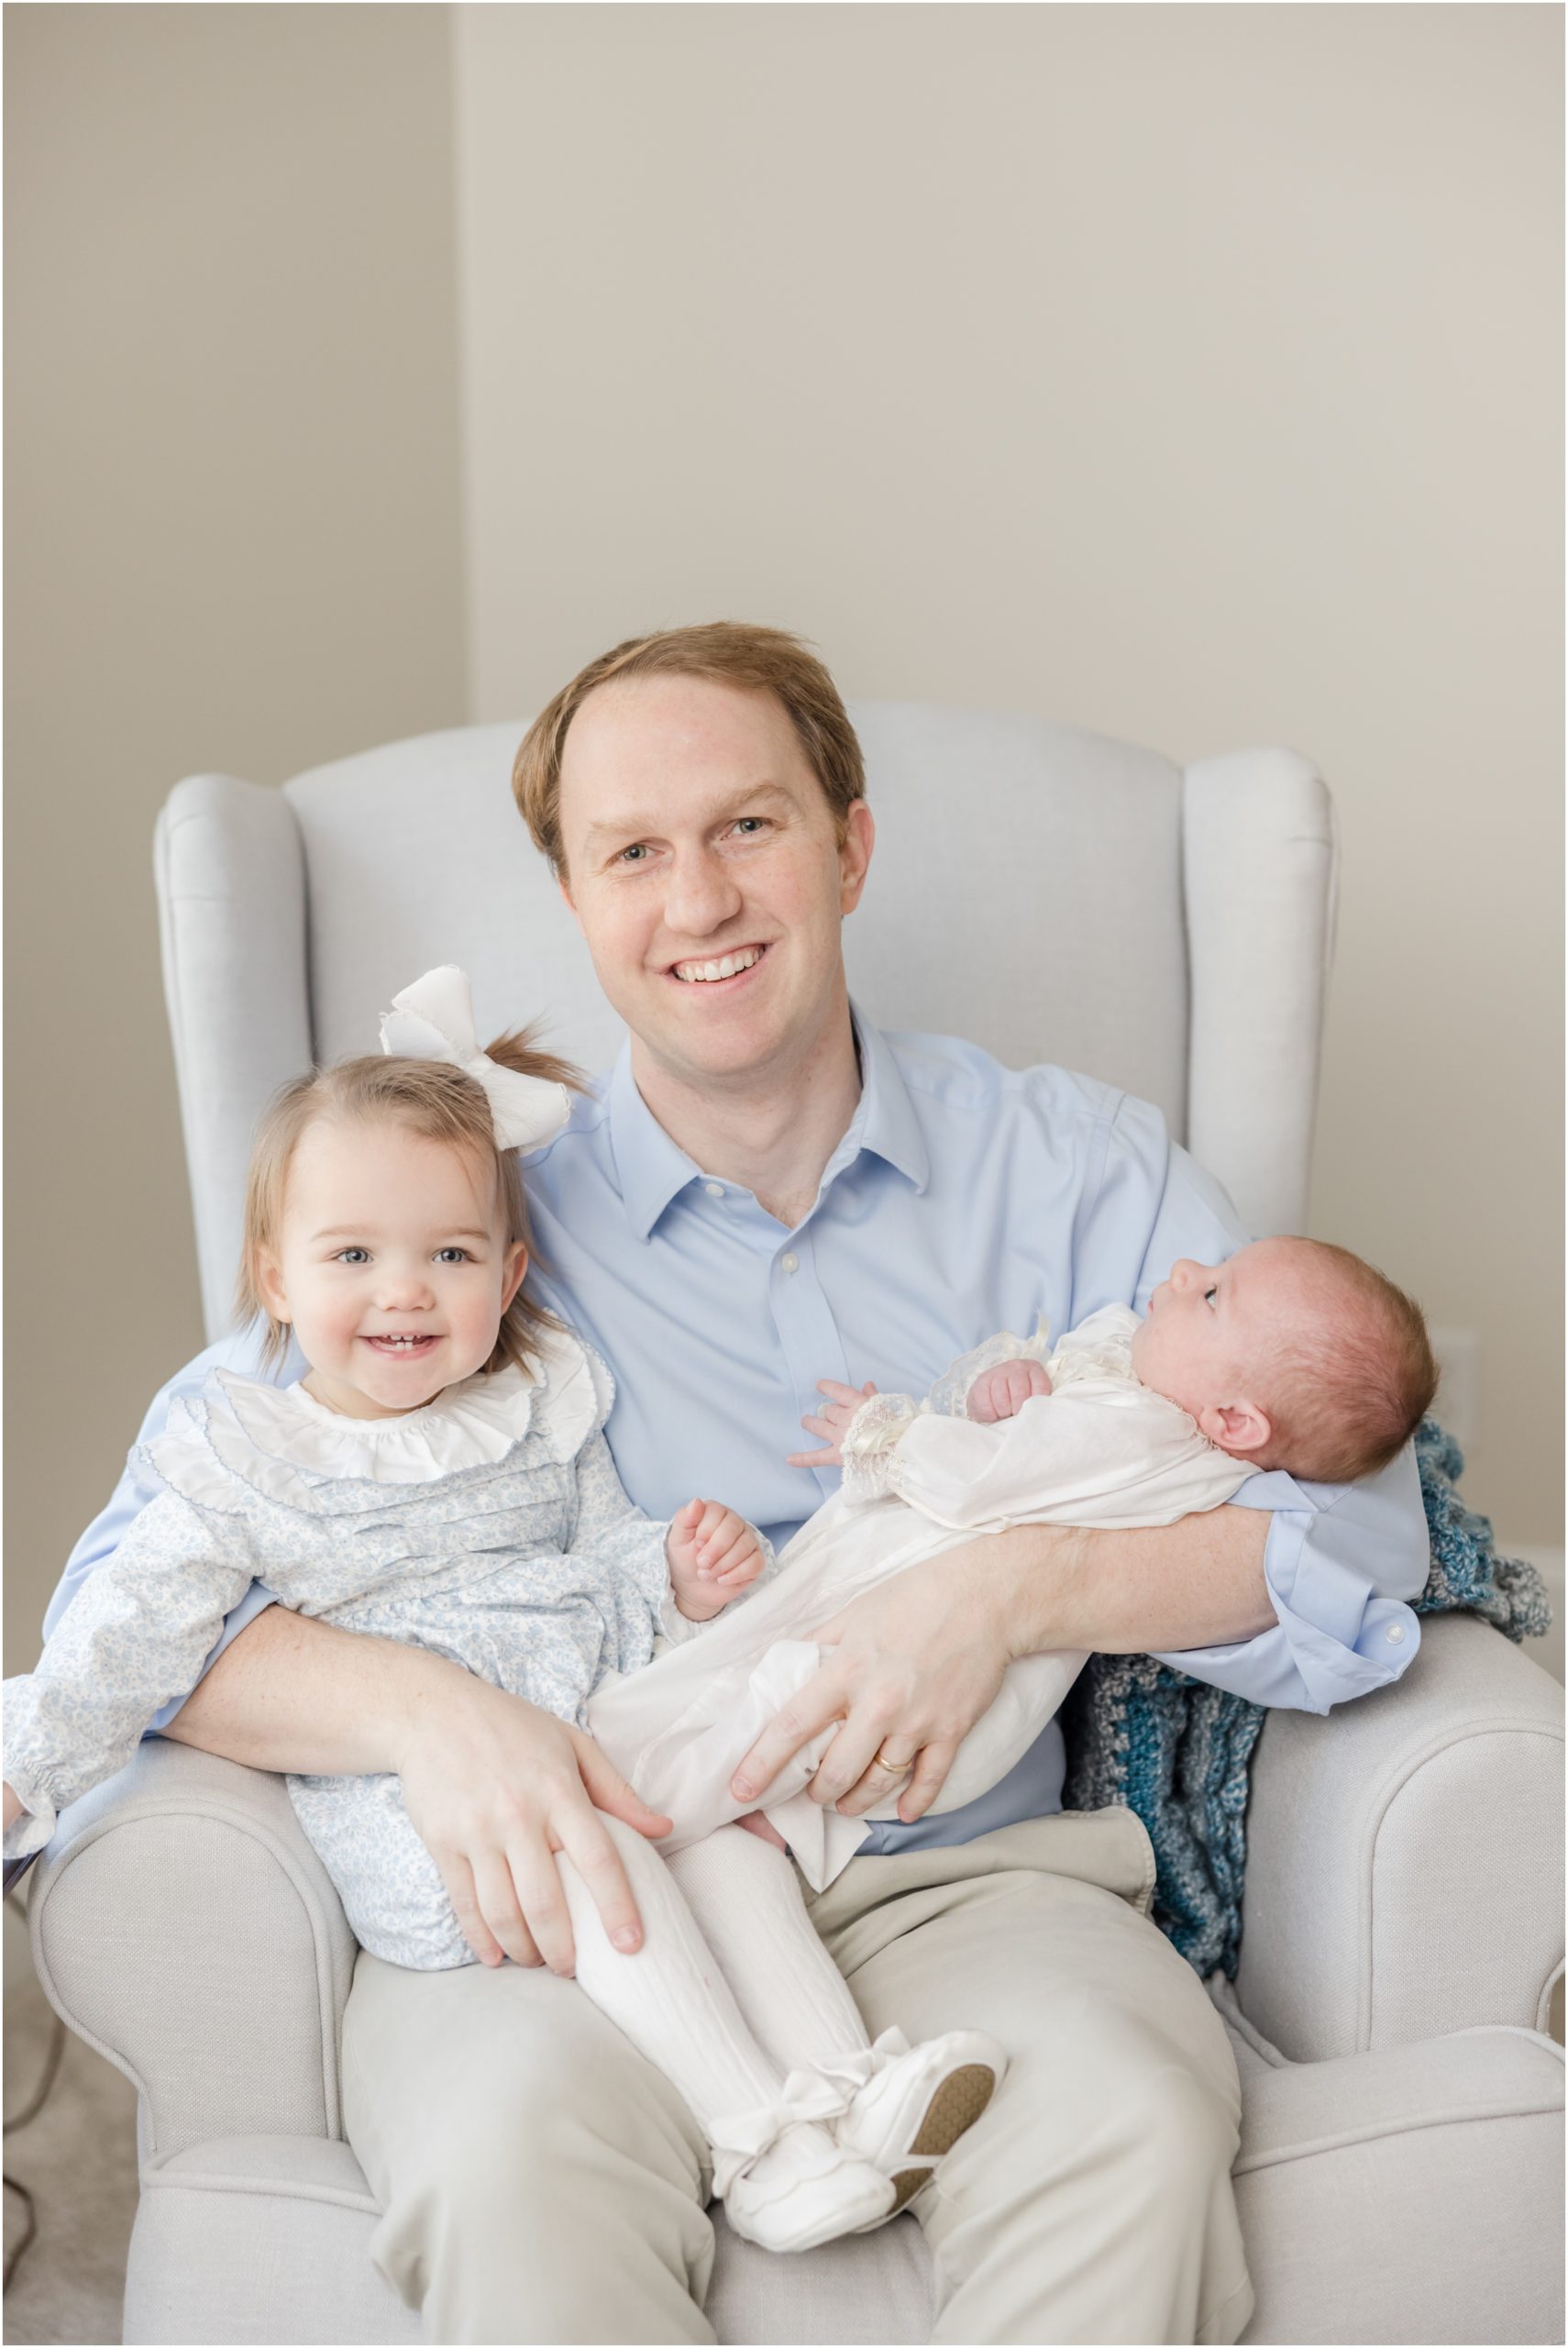 A father seated in a rocker holding his toddler daughter and newborn son during a Greenville newborn photography sesion.